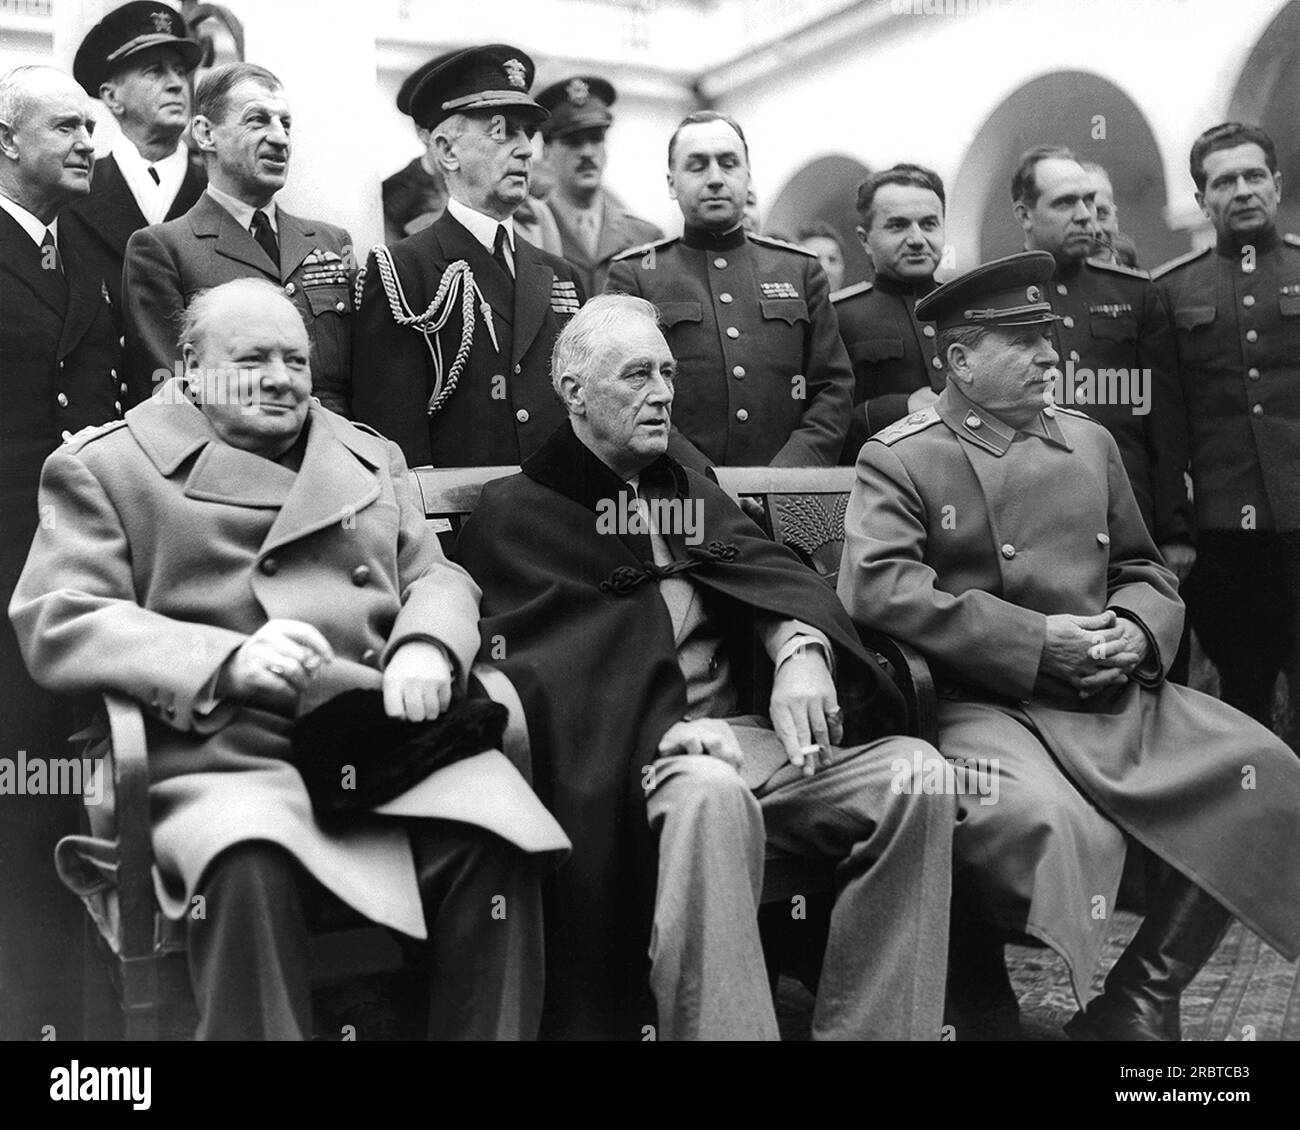 Yalta, Ukraine:   February 4-11, 1945. A scene from the Crimean Conference with Prime Minister Winston Churchill, President Franklin D. Roosevelt, and Marshal Joseph Stalin at the palace in Yalta, where the Big Three met in the second of their wartime conferences. Stock Photo